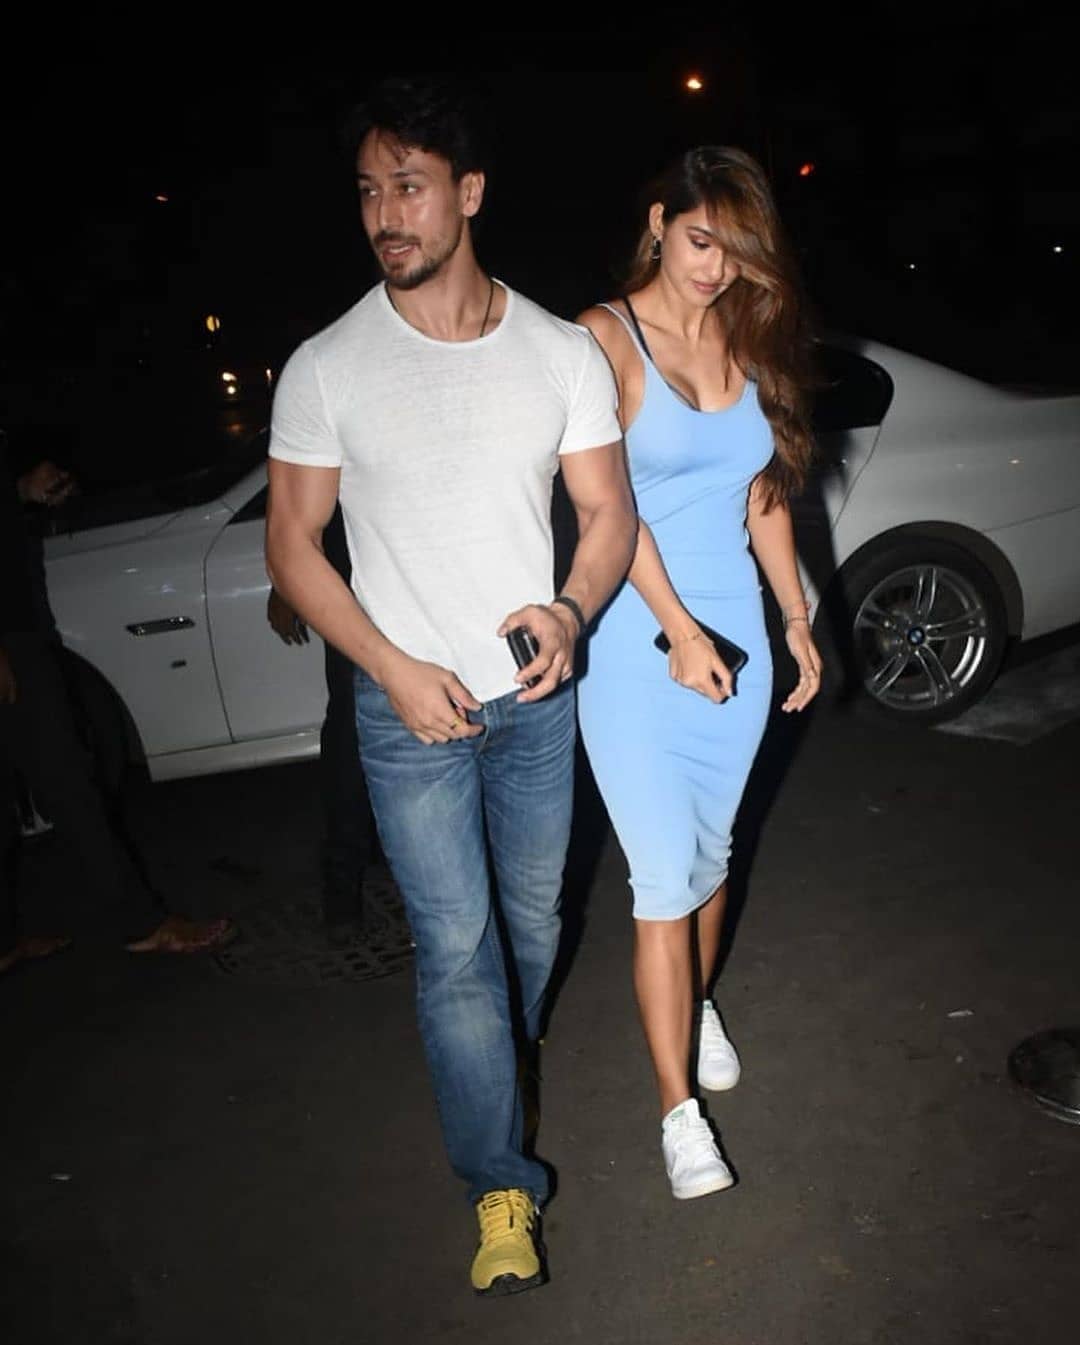 Disha patani Hot In A Tight Sleeveless Frock With Her Boy Friend Tiger Shroff